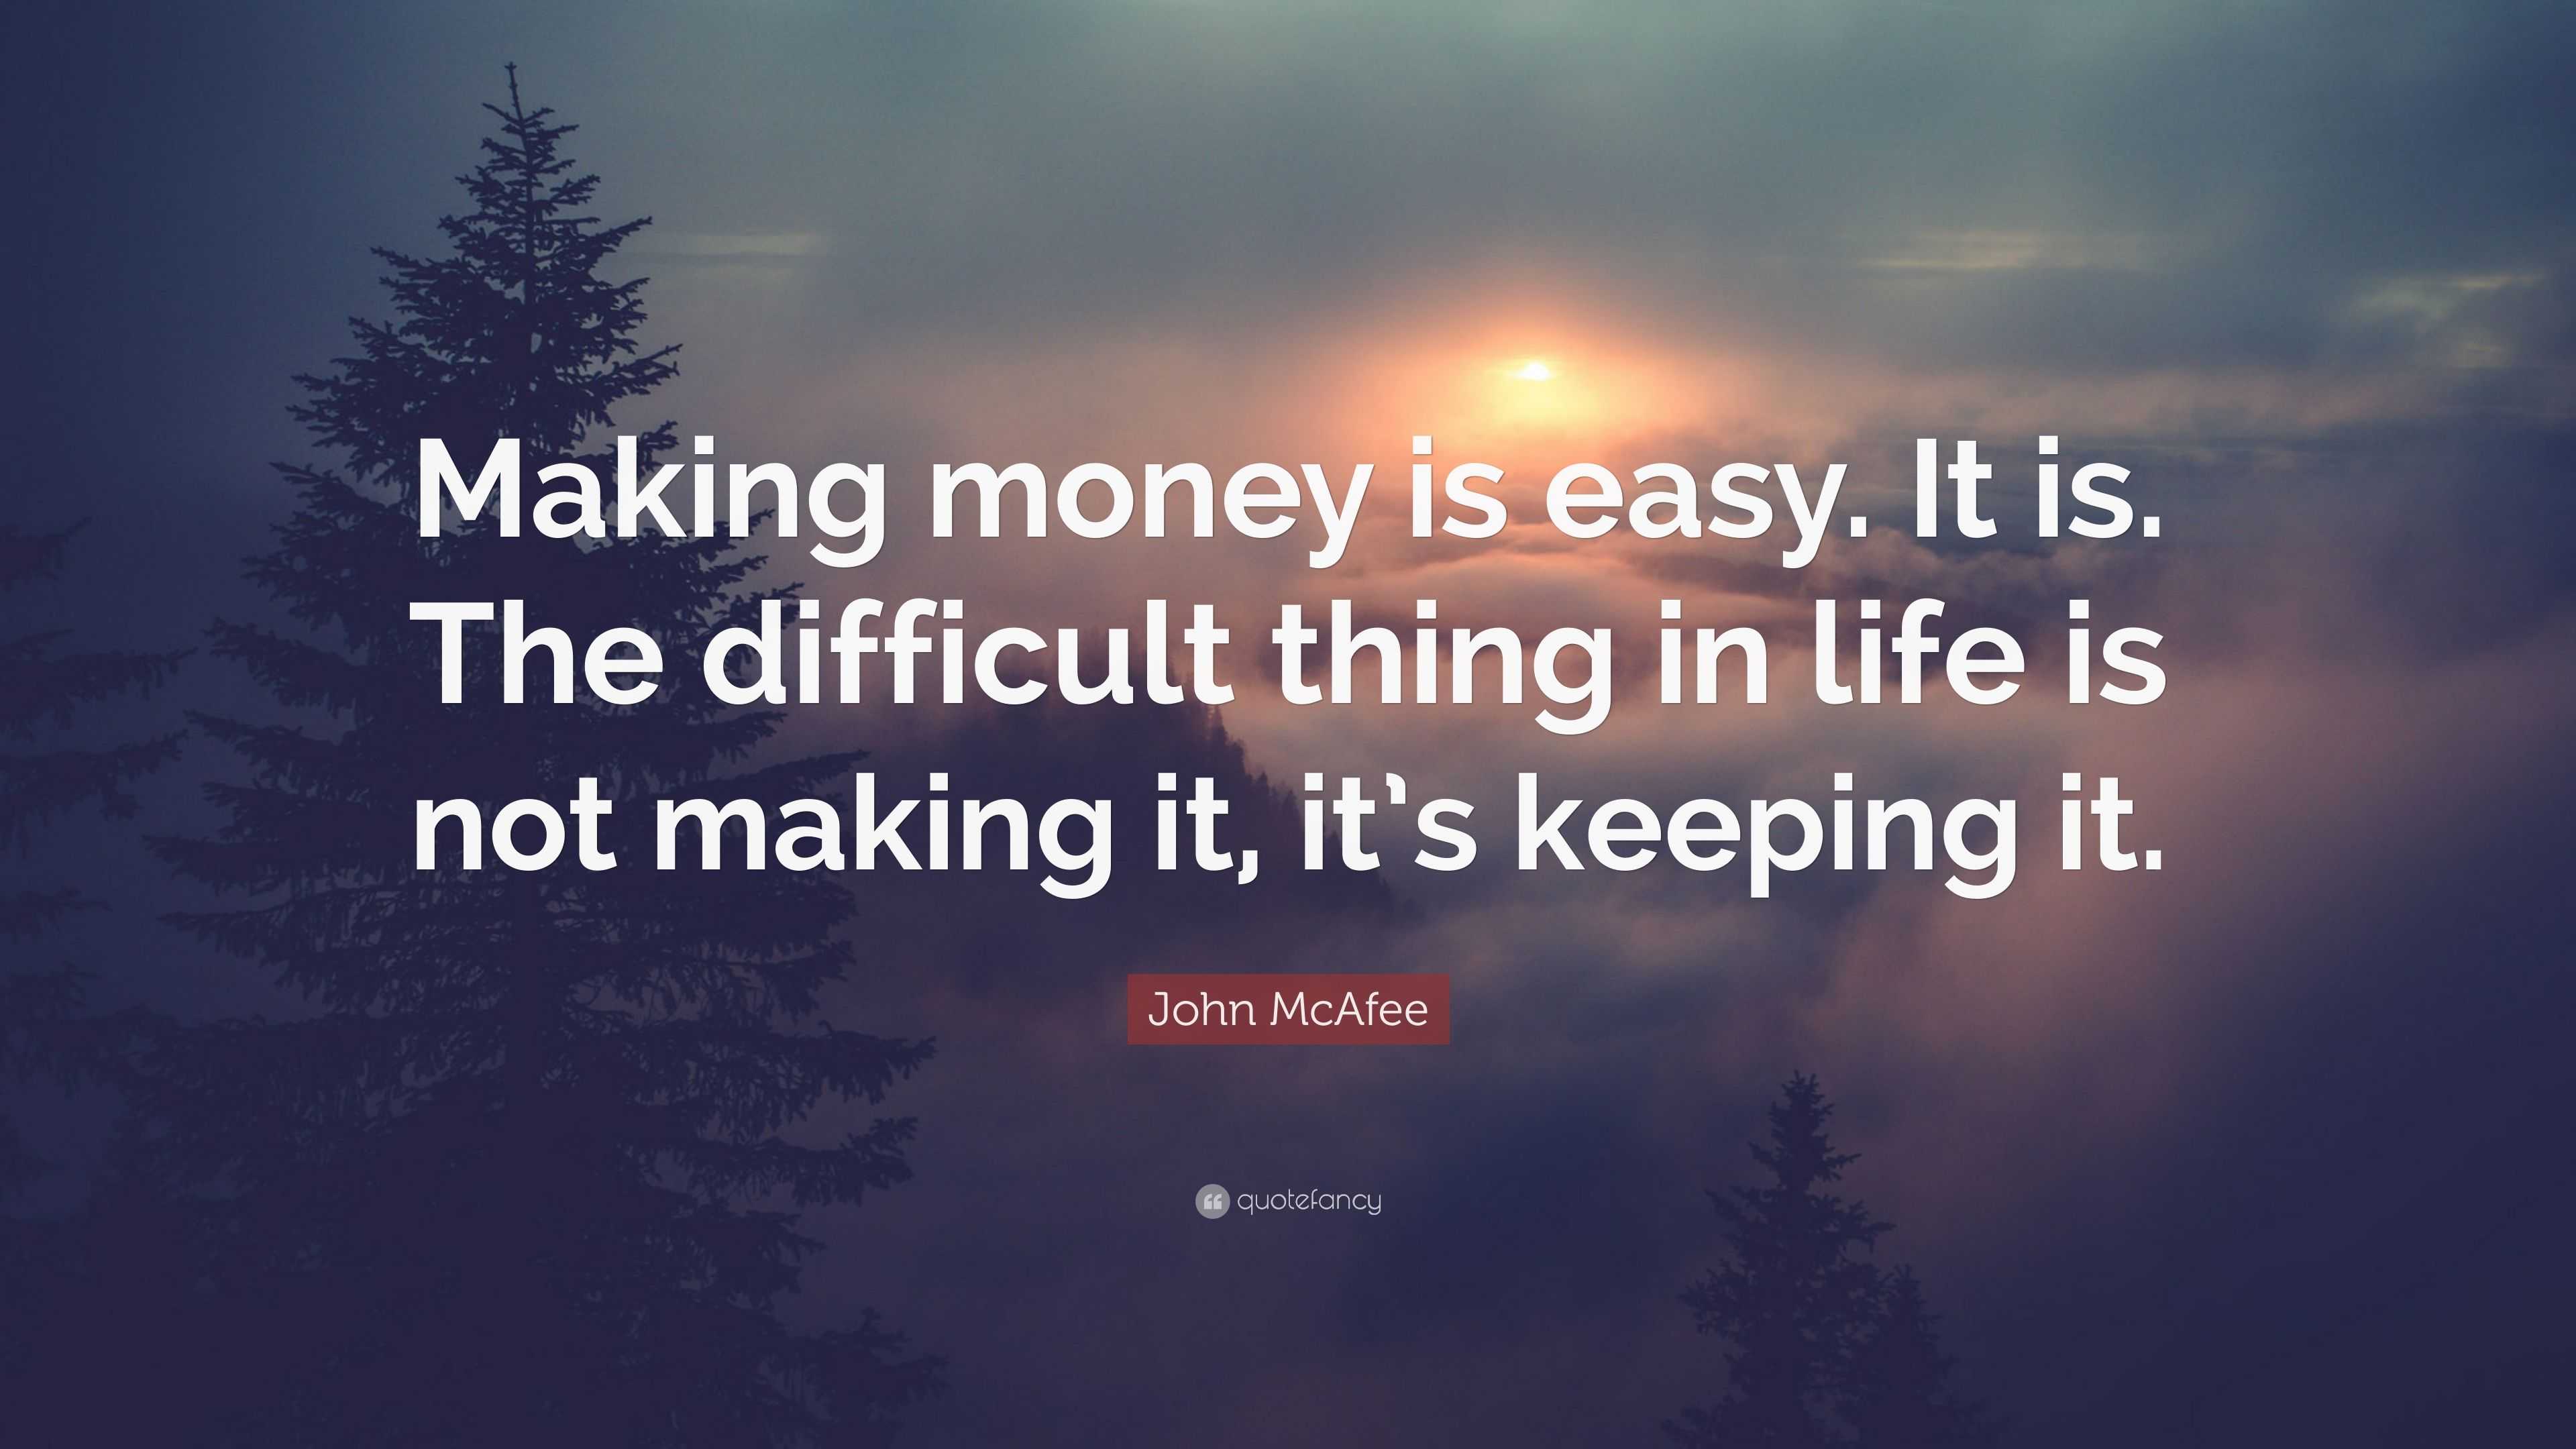 life is not easy quotes john mcafee quote u201cmaking money is easy it is the difficult